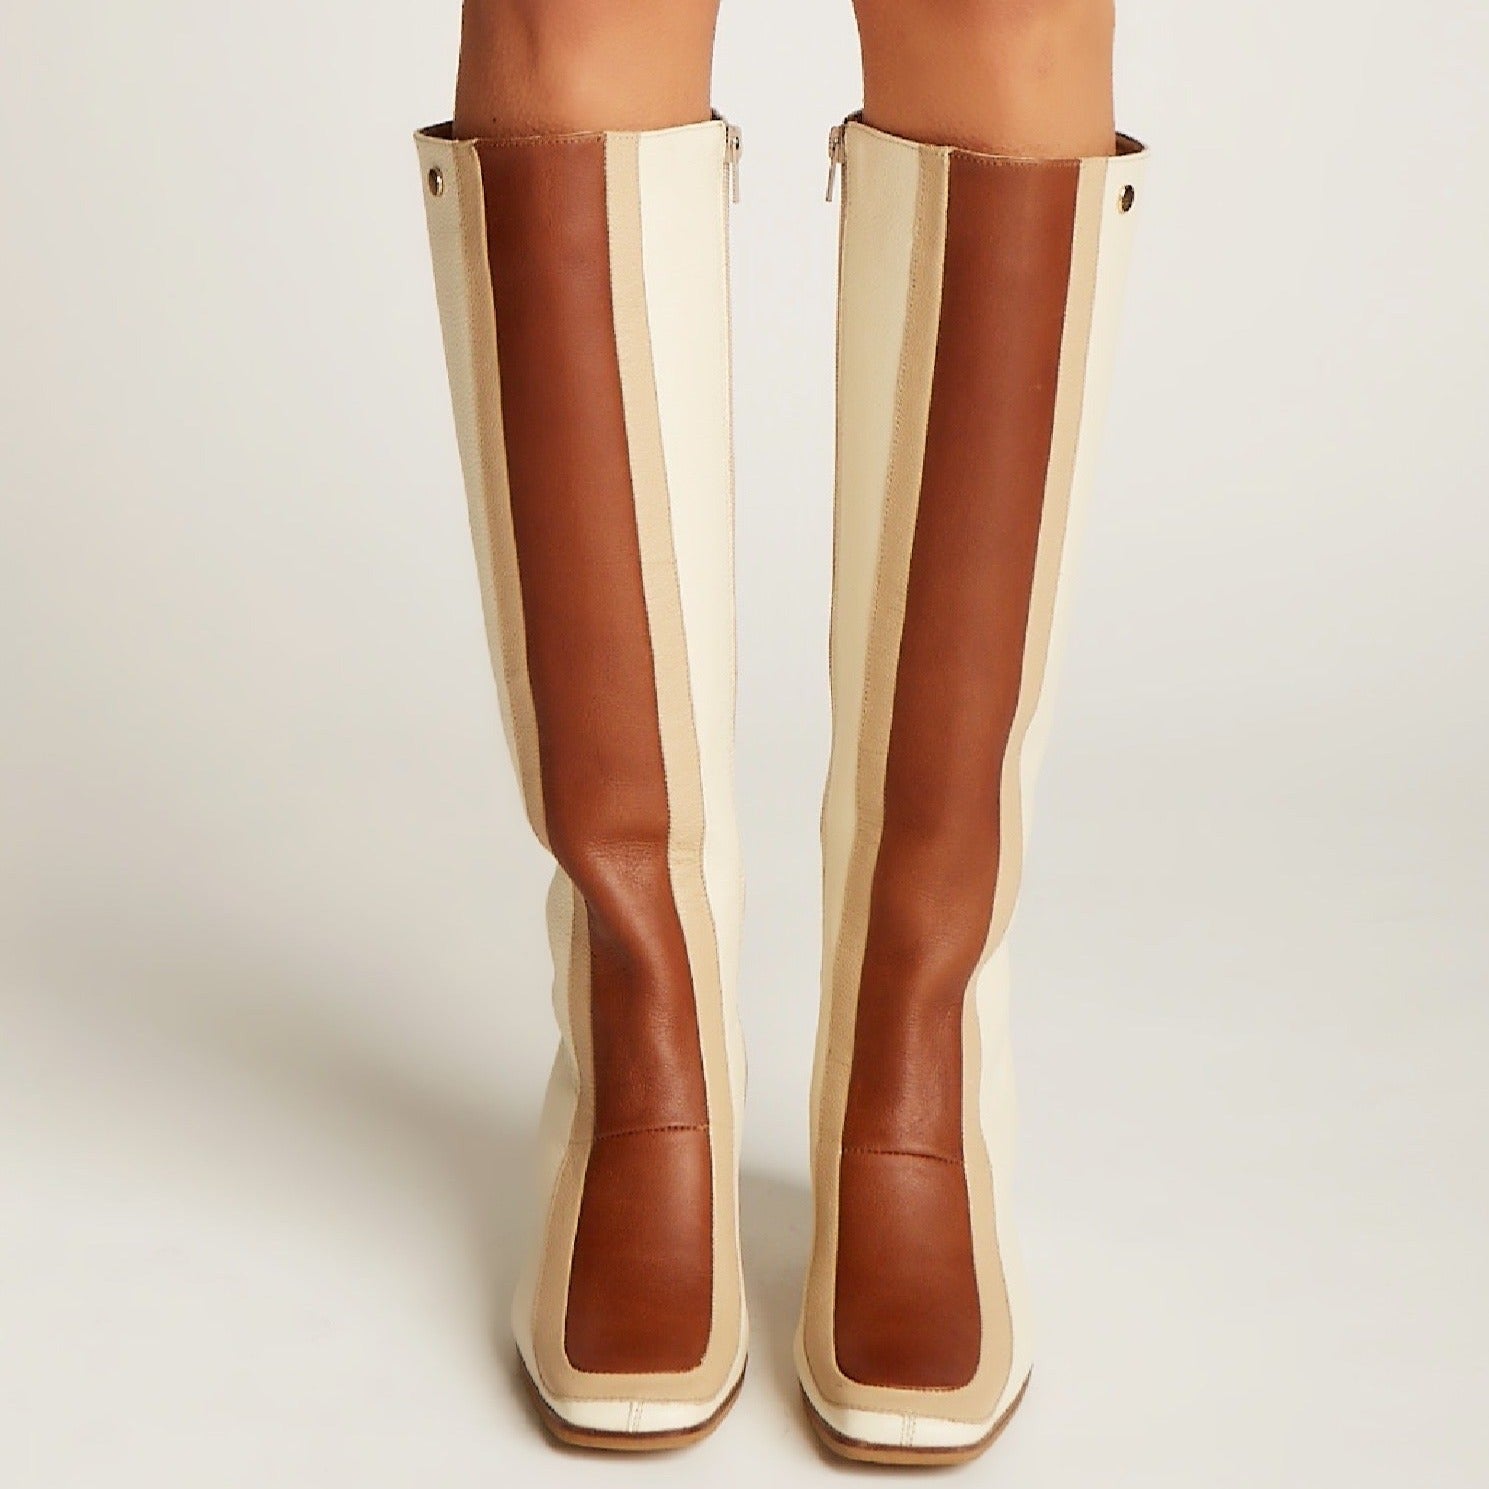 Handcrafted Leather Boots, Ivory White, Tan Arequipe ,and Honey Tan Smooth Leather Knee High Boots. Stivali New York